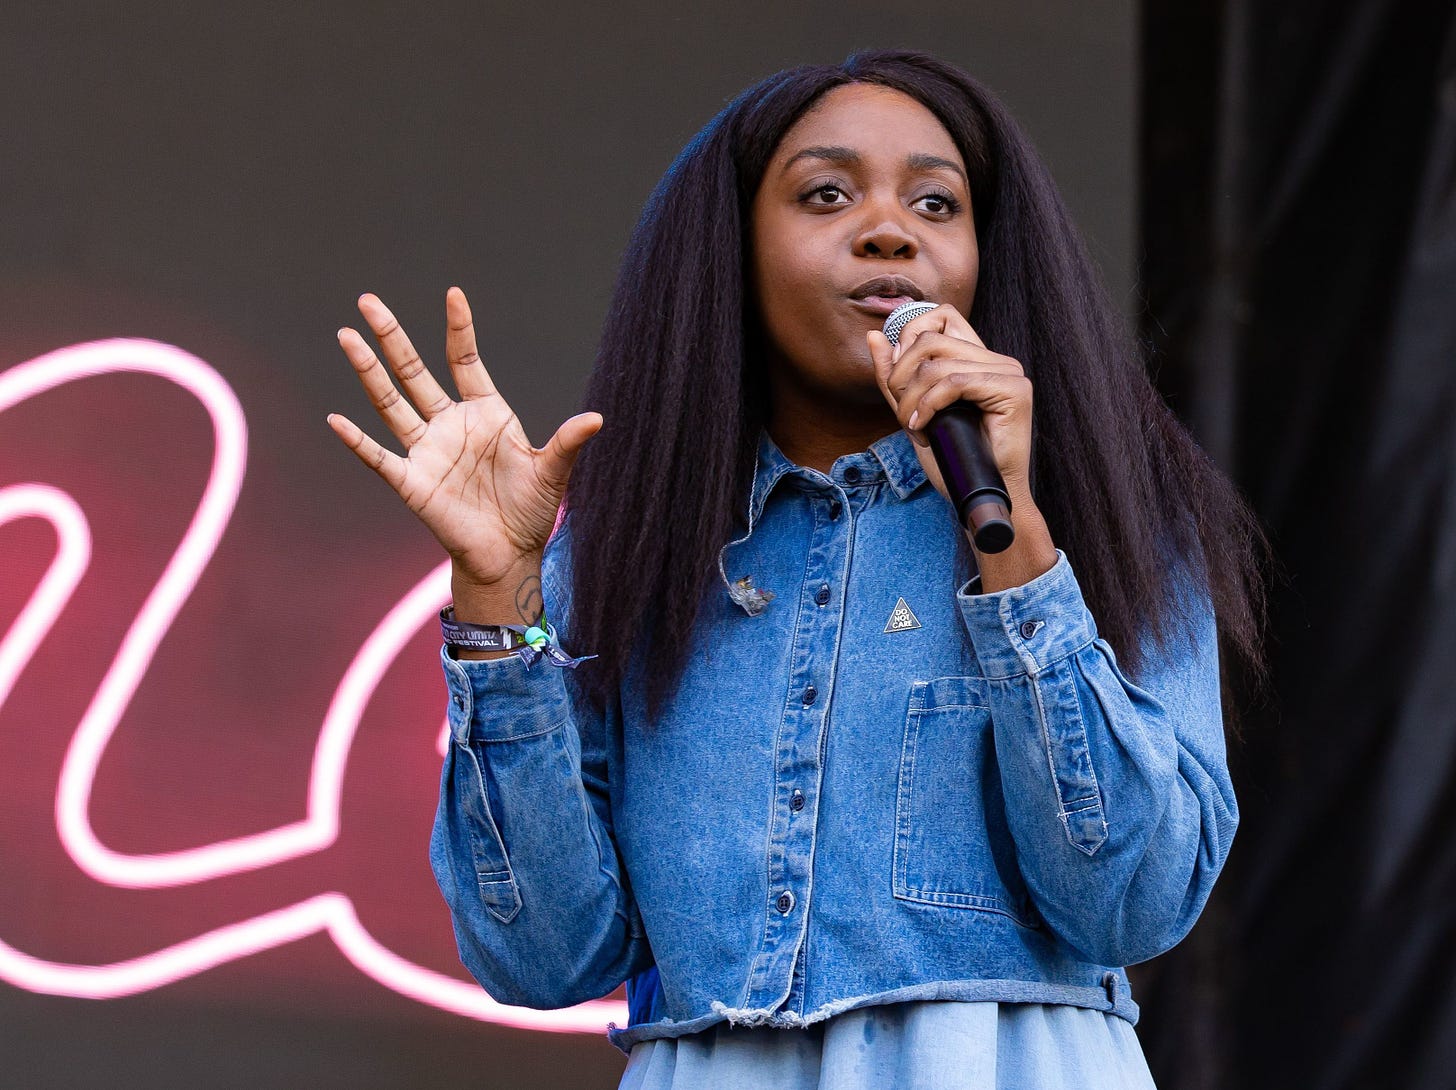 On Jan. 11, Rapper Noname Wants You To Register For A Library Card ...